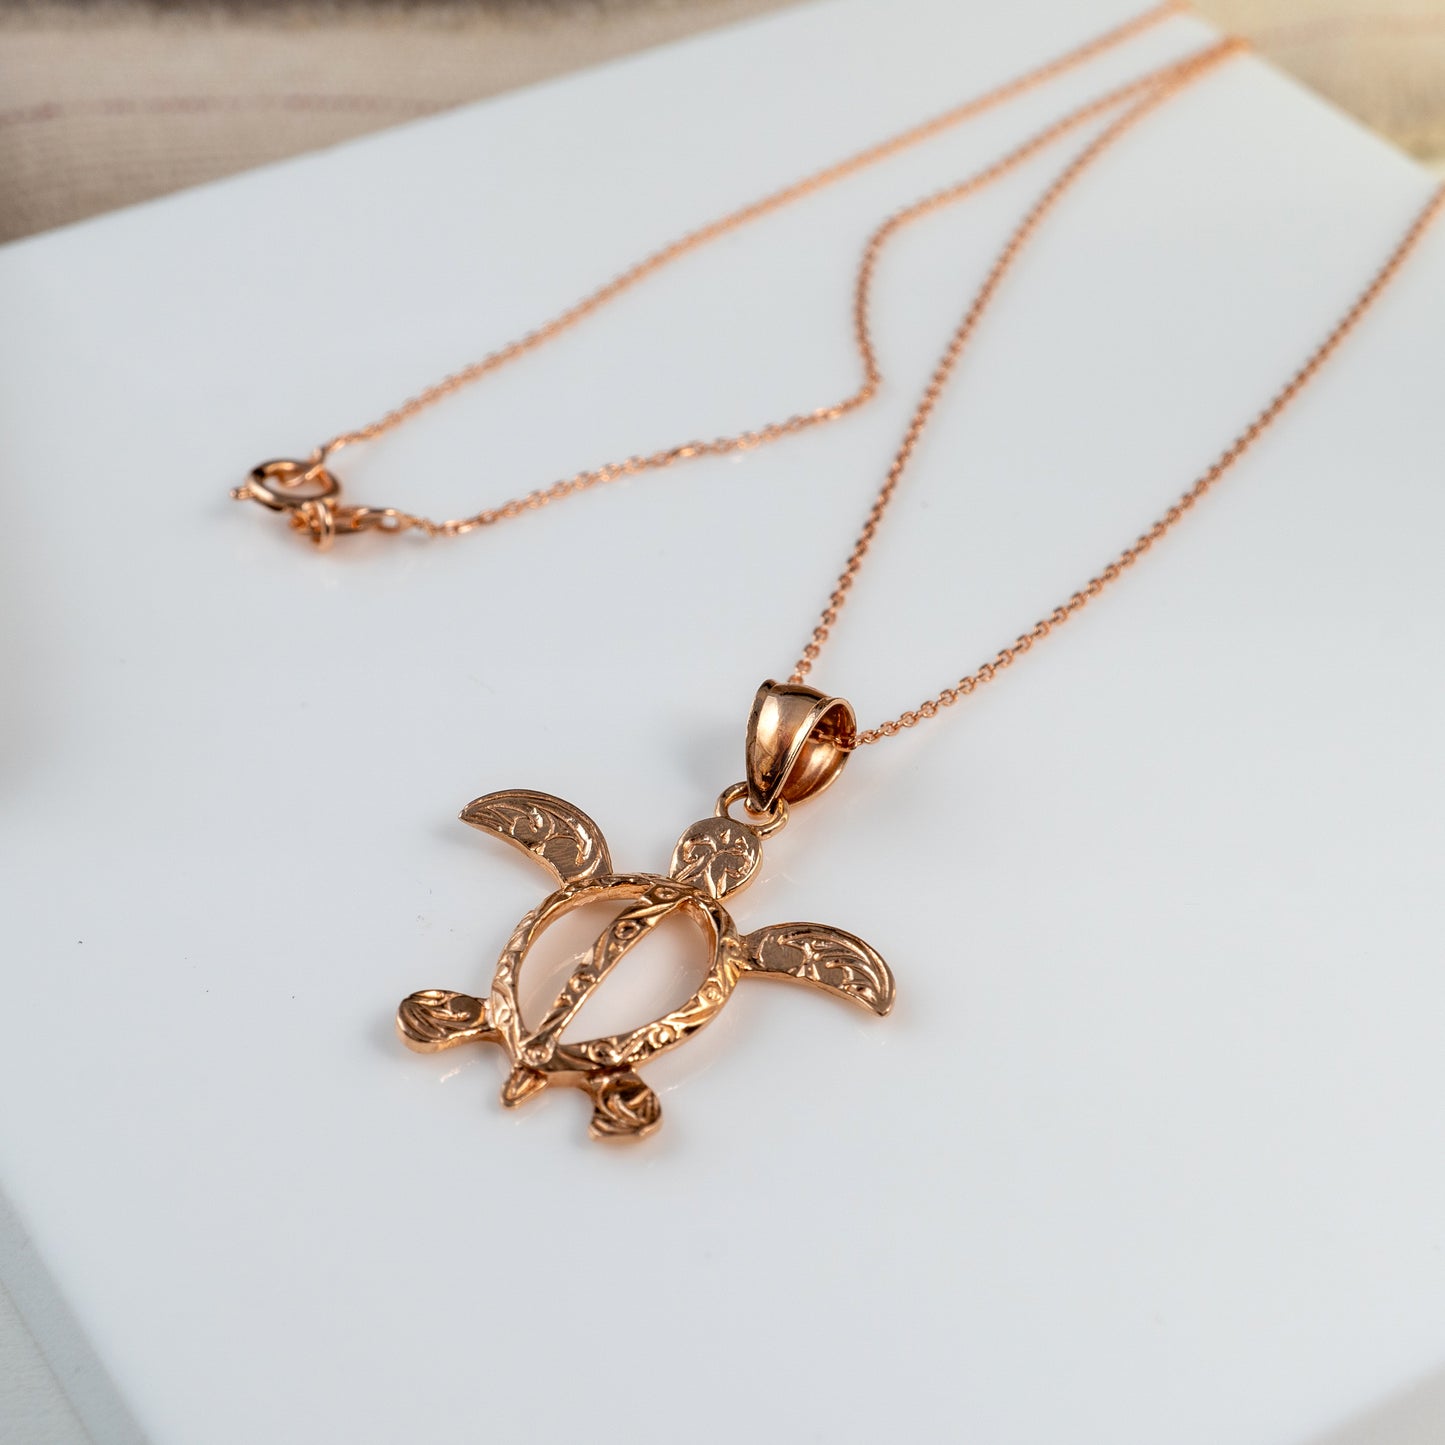 Rose gold Turtle charm pendant necklace with ocean jewellery details